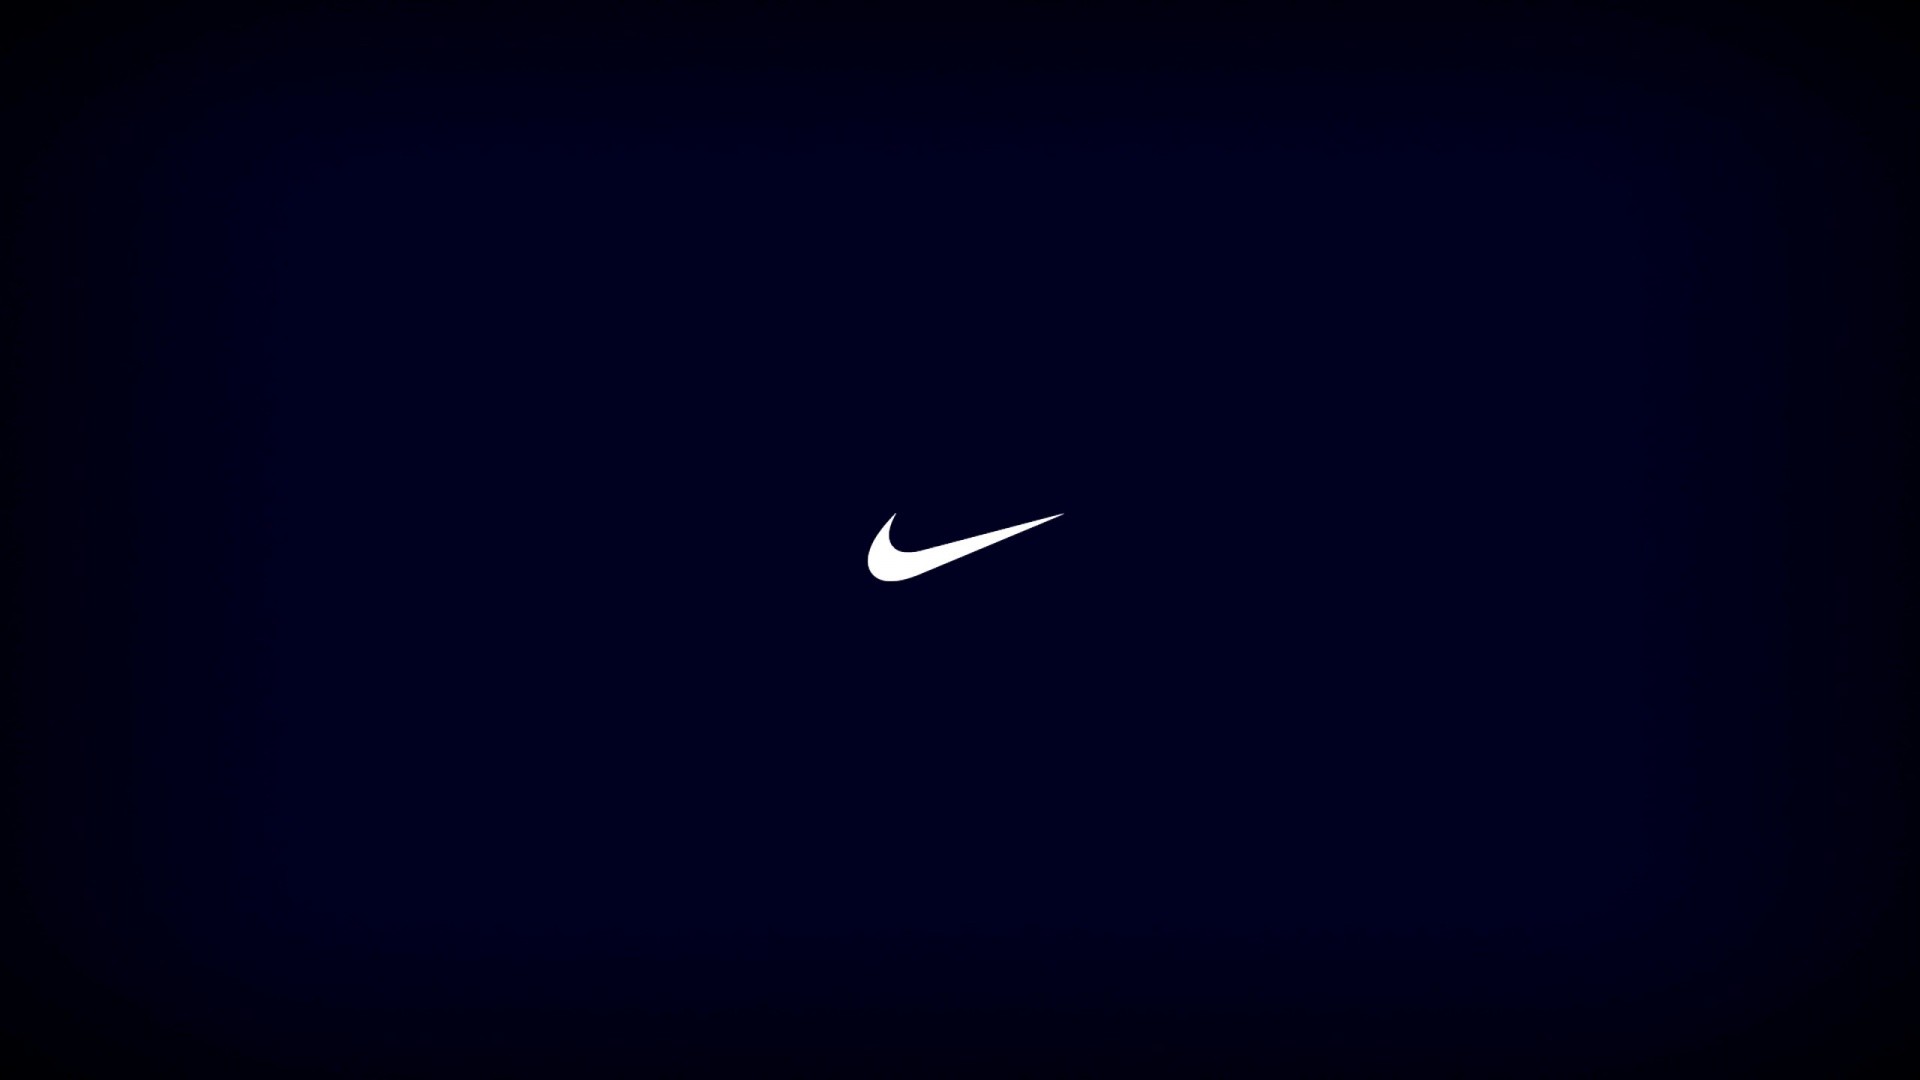 1920x1080 Nike Wallpapers Hd (59 Wallpapers)